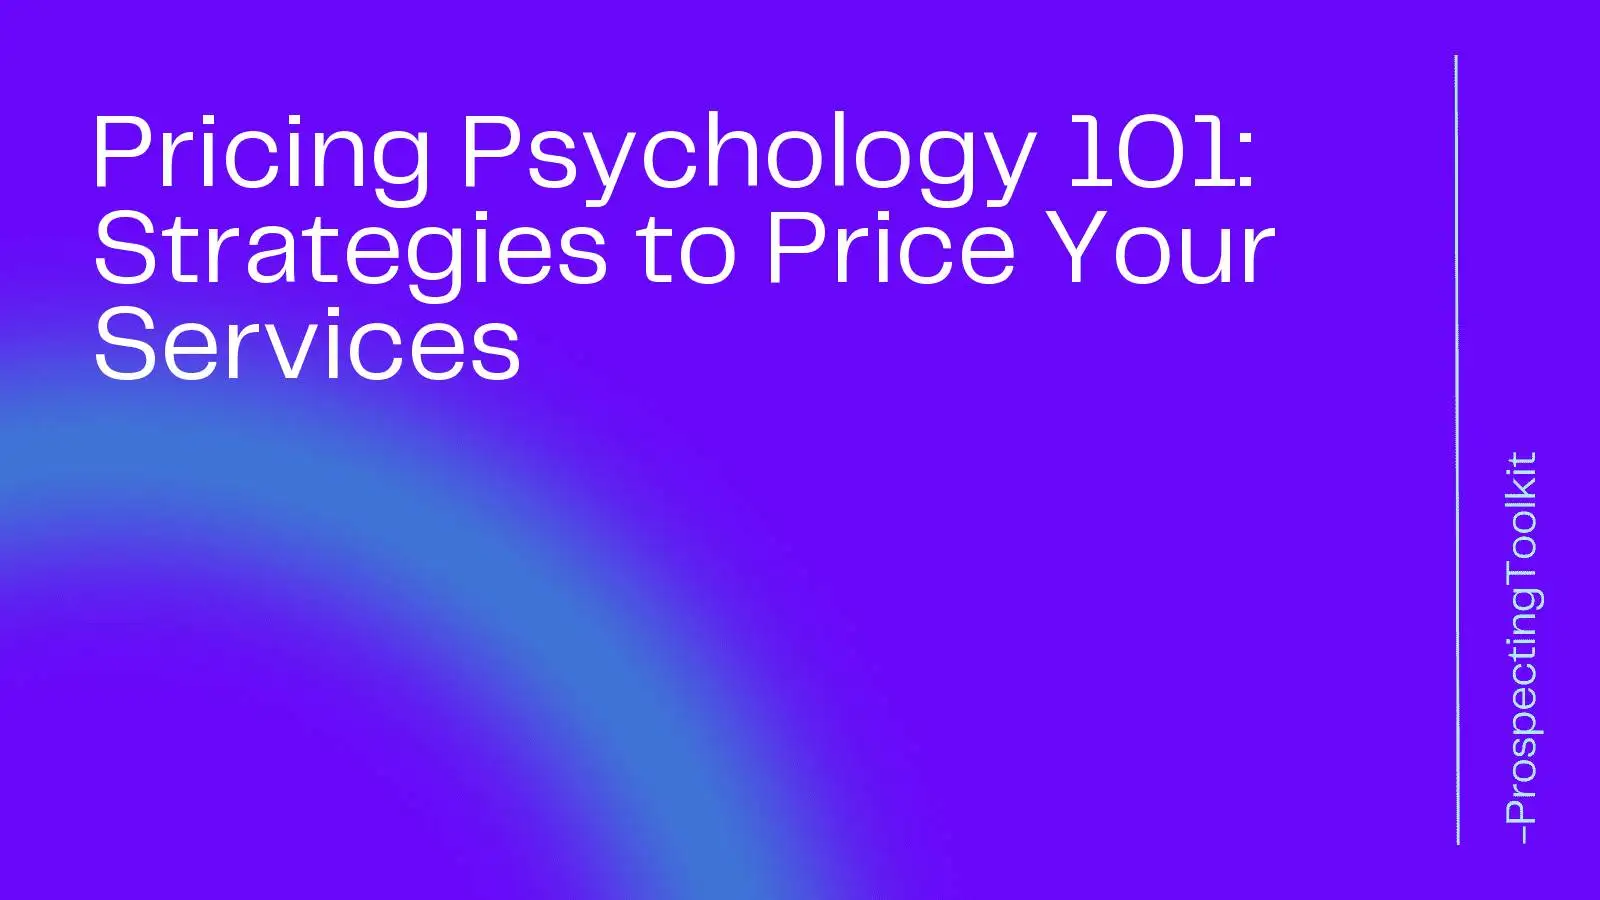 Pricing Psychology 101: Strategies to Price Your Services